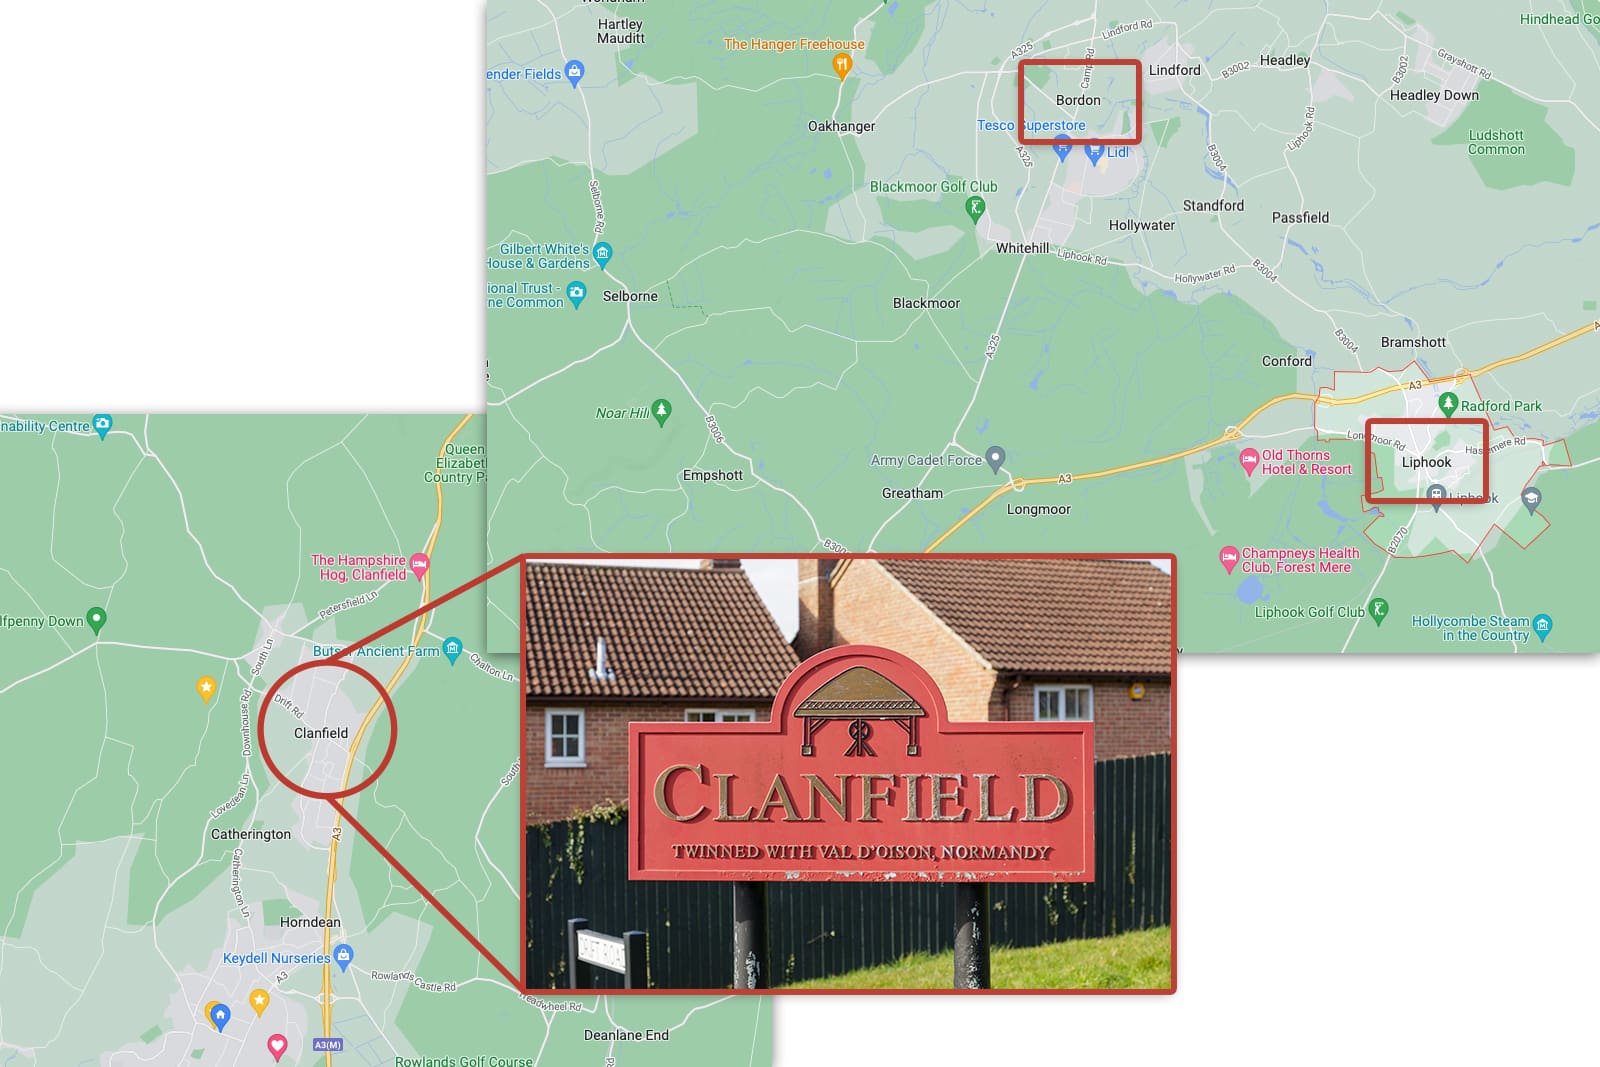 map of liphook, bordon and clanfield with local road sign